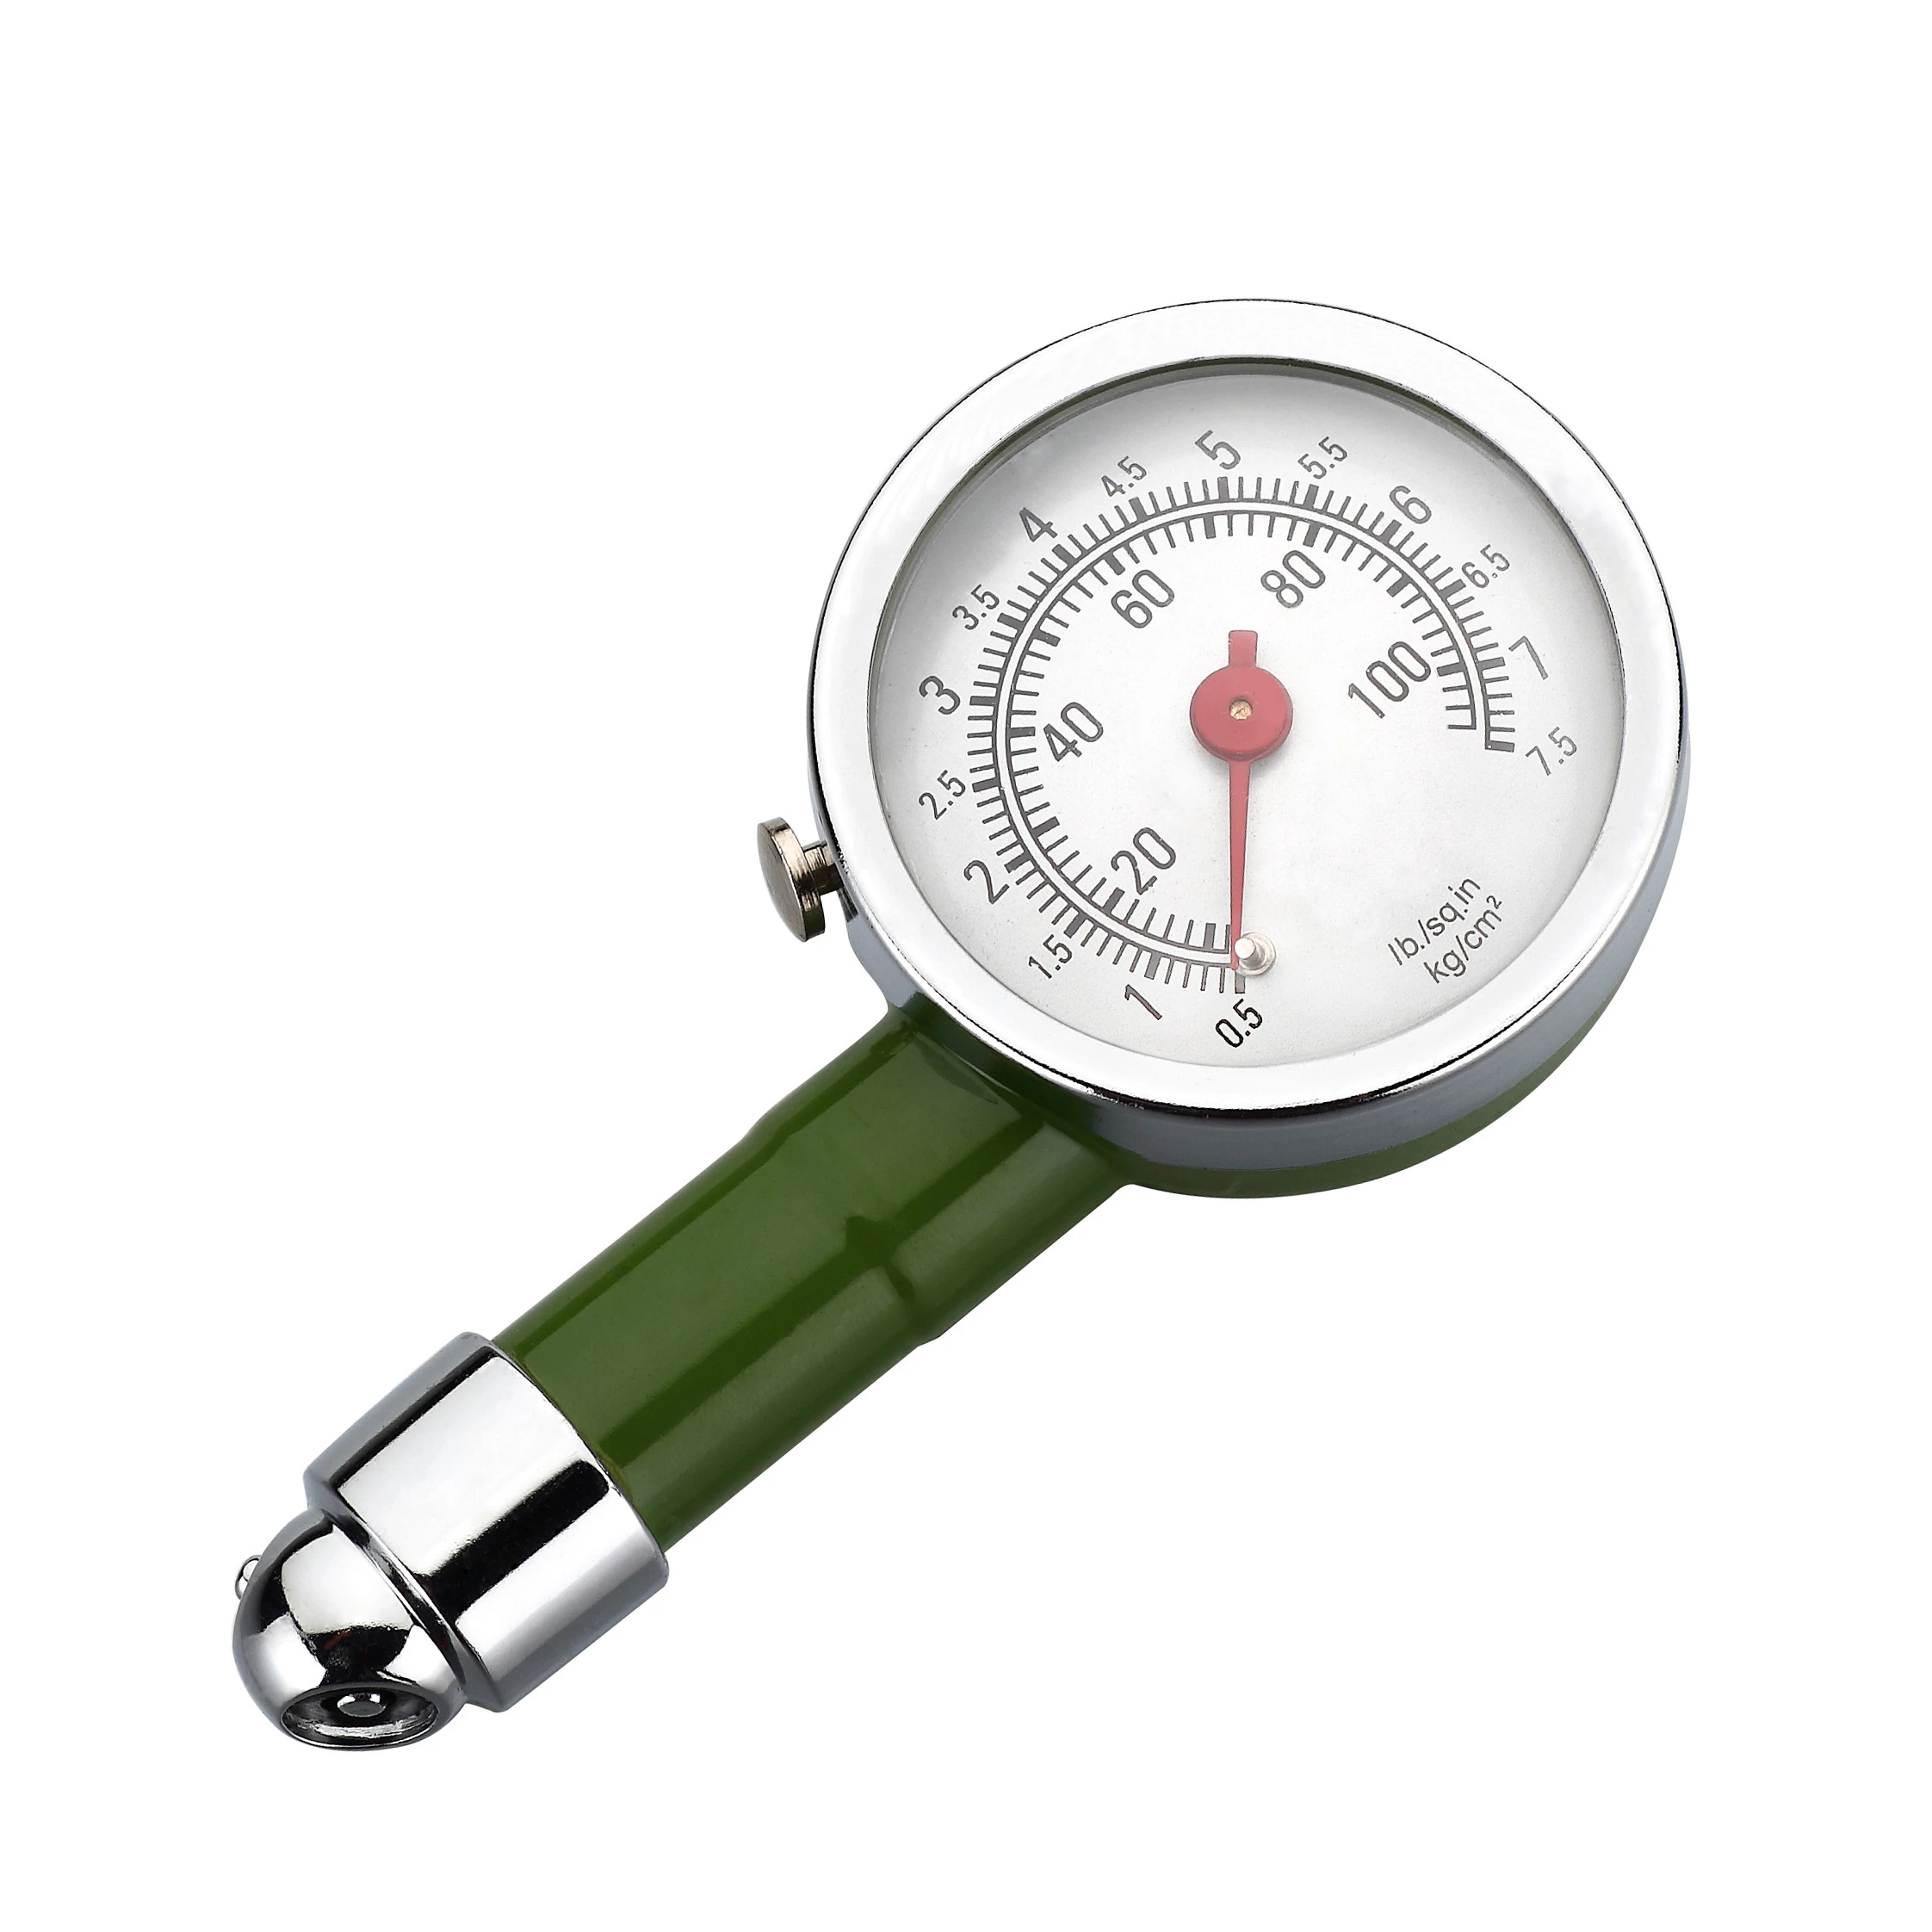 CACACO Bright Chrome and Painted Round Dial Plastic Tire Pressure Gauge For Cars, Bicycles, Trucks, Motorcycles